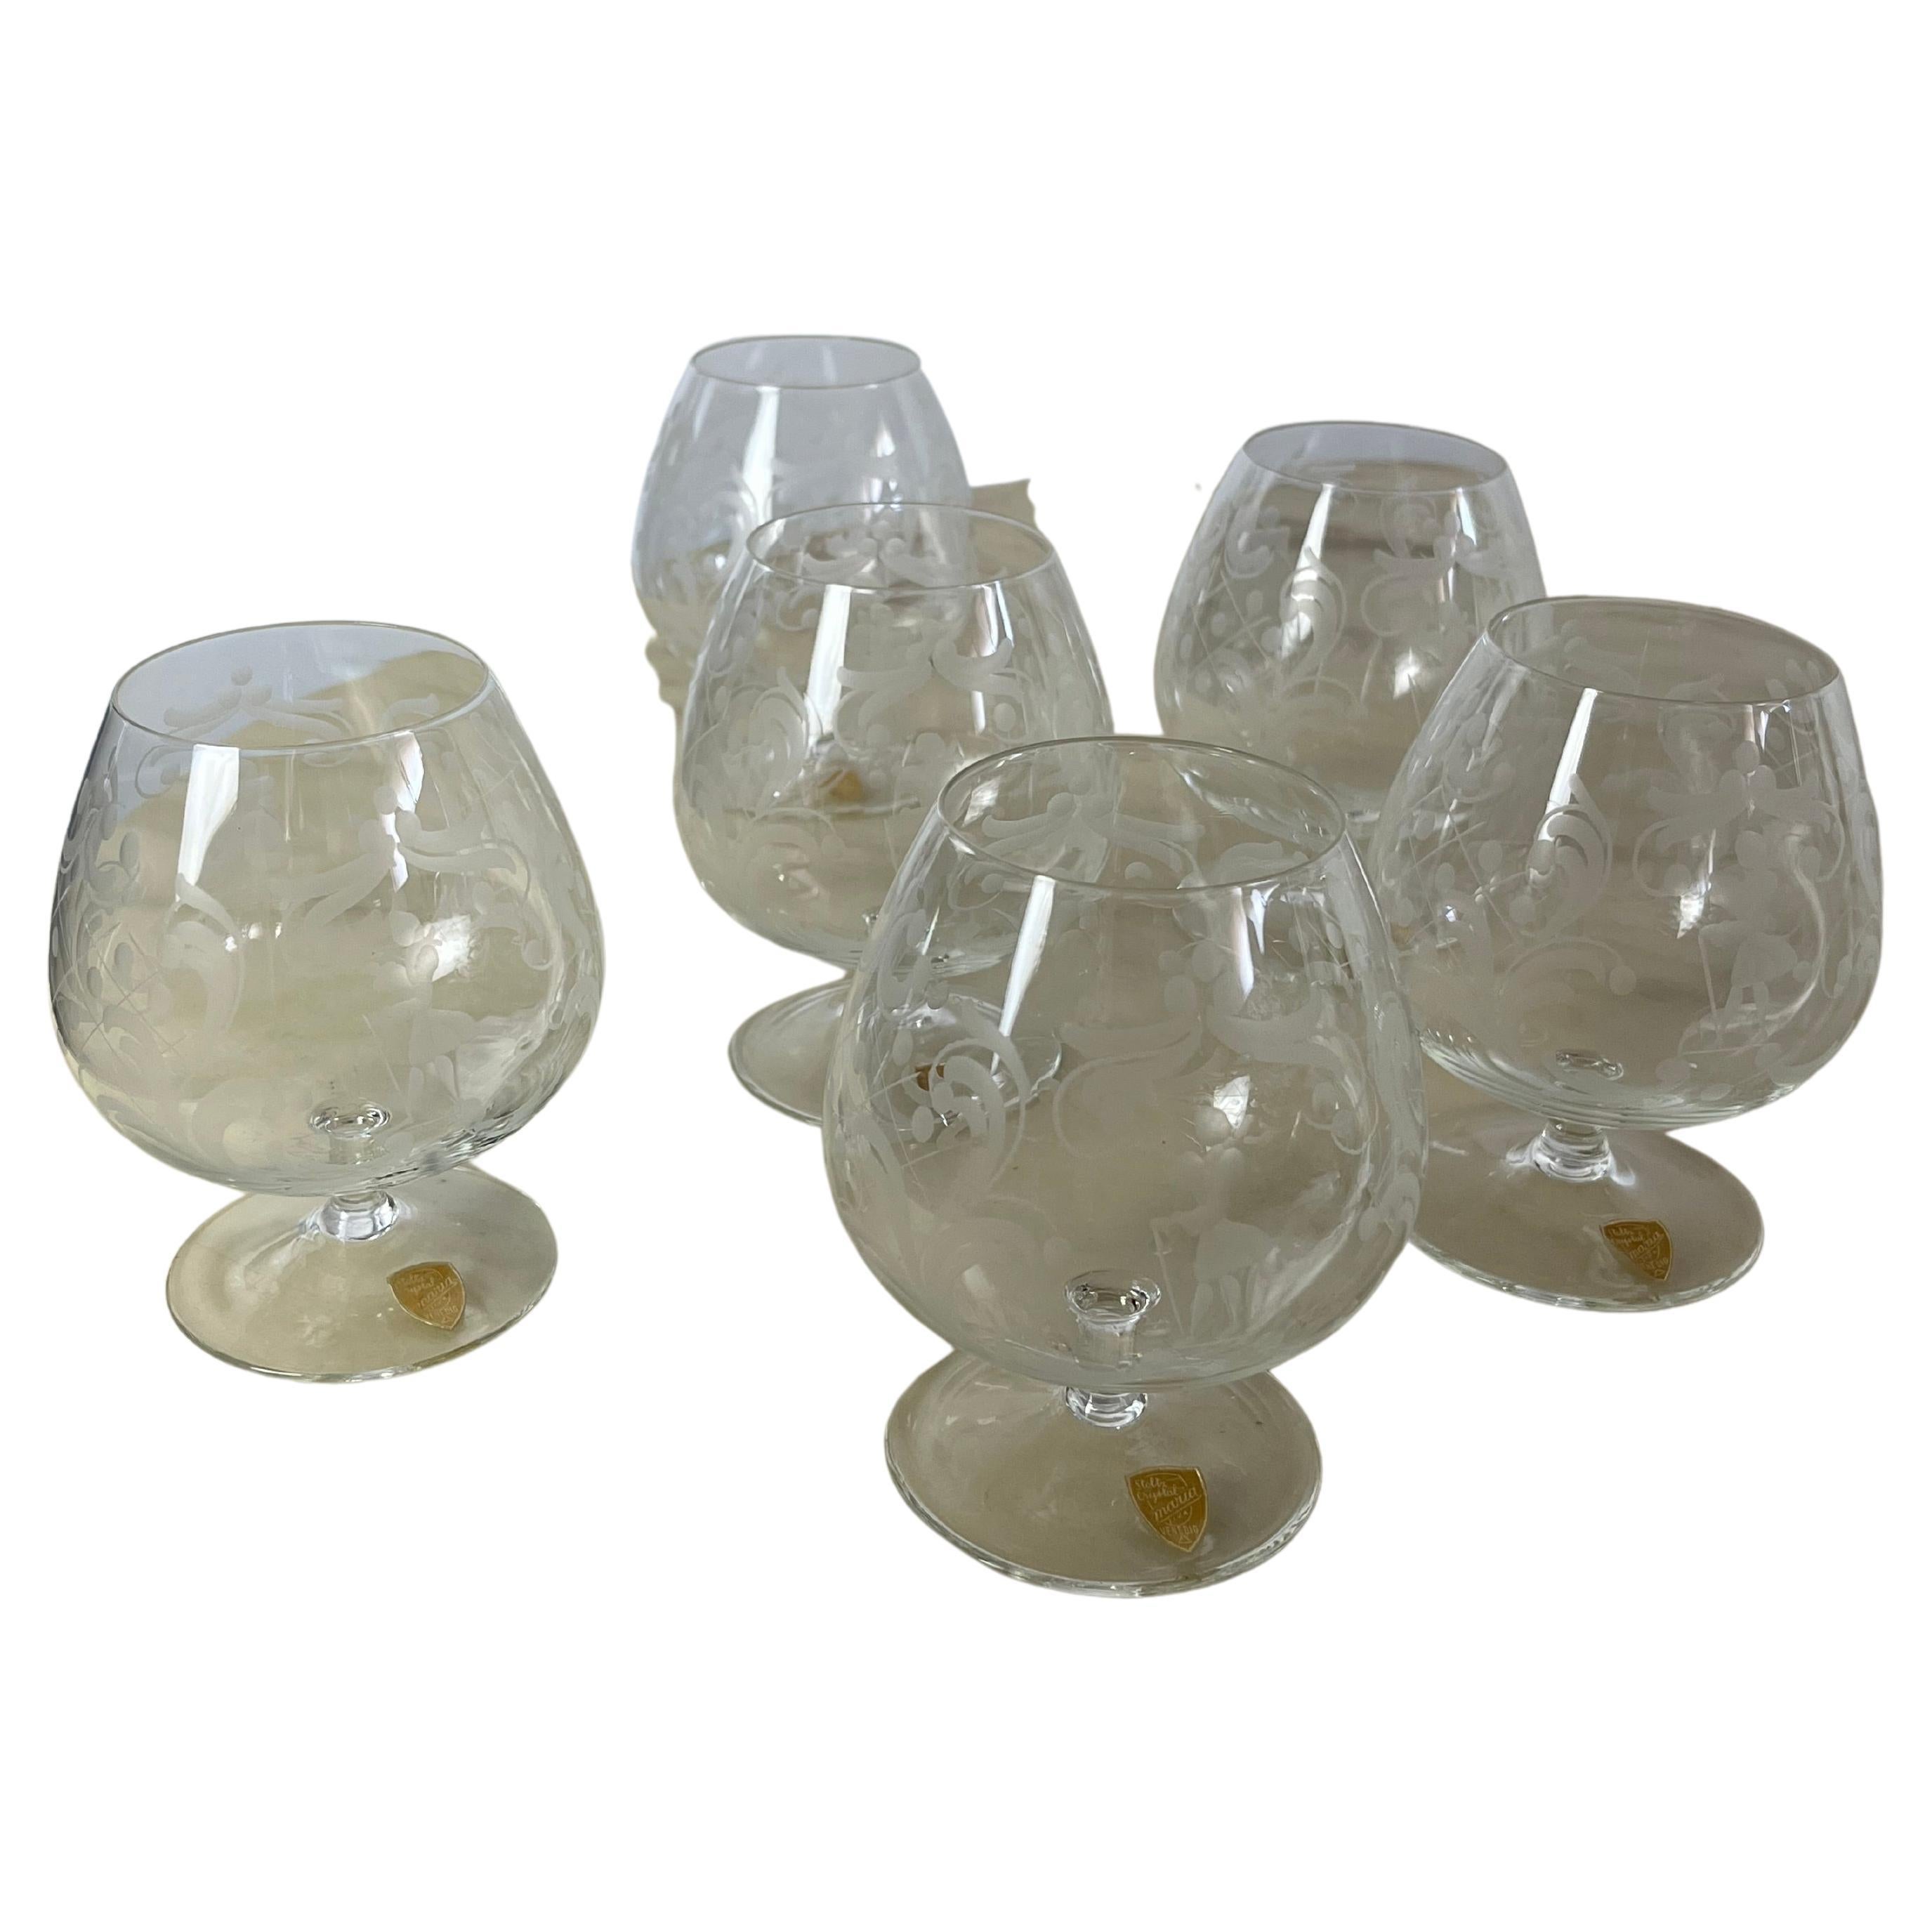 Six Cognac Glasses in Hand-Engraved Crystal, Venice, 1960s